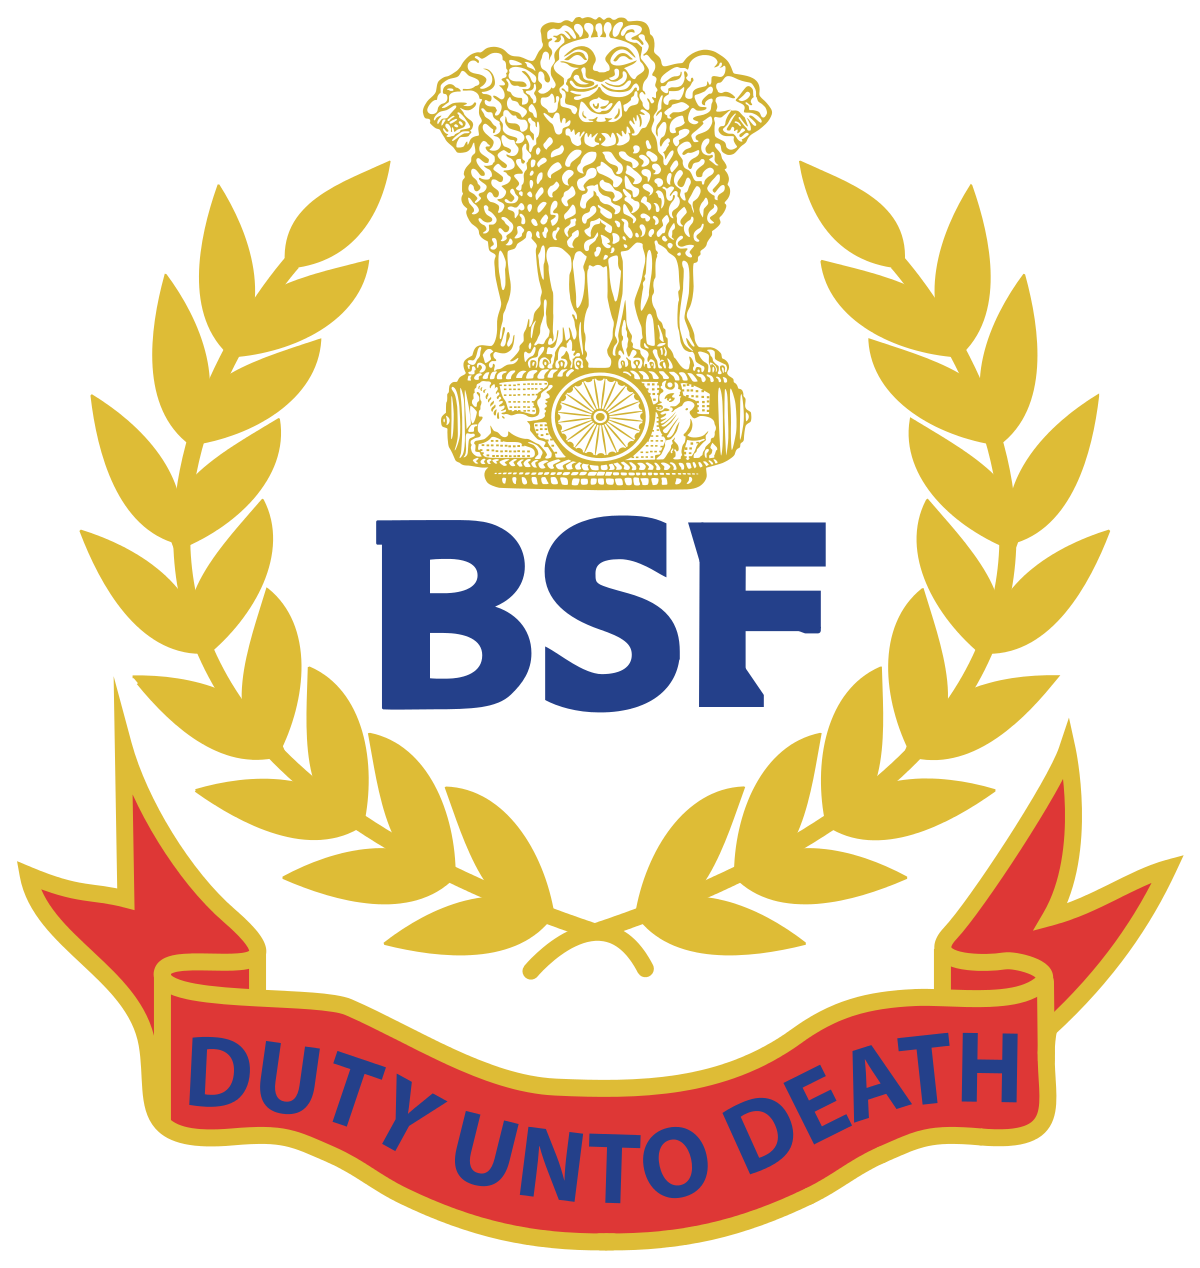 BSF ASI Steno Admit Card 2017 Now Available for Download at www.bsf.nic.in